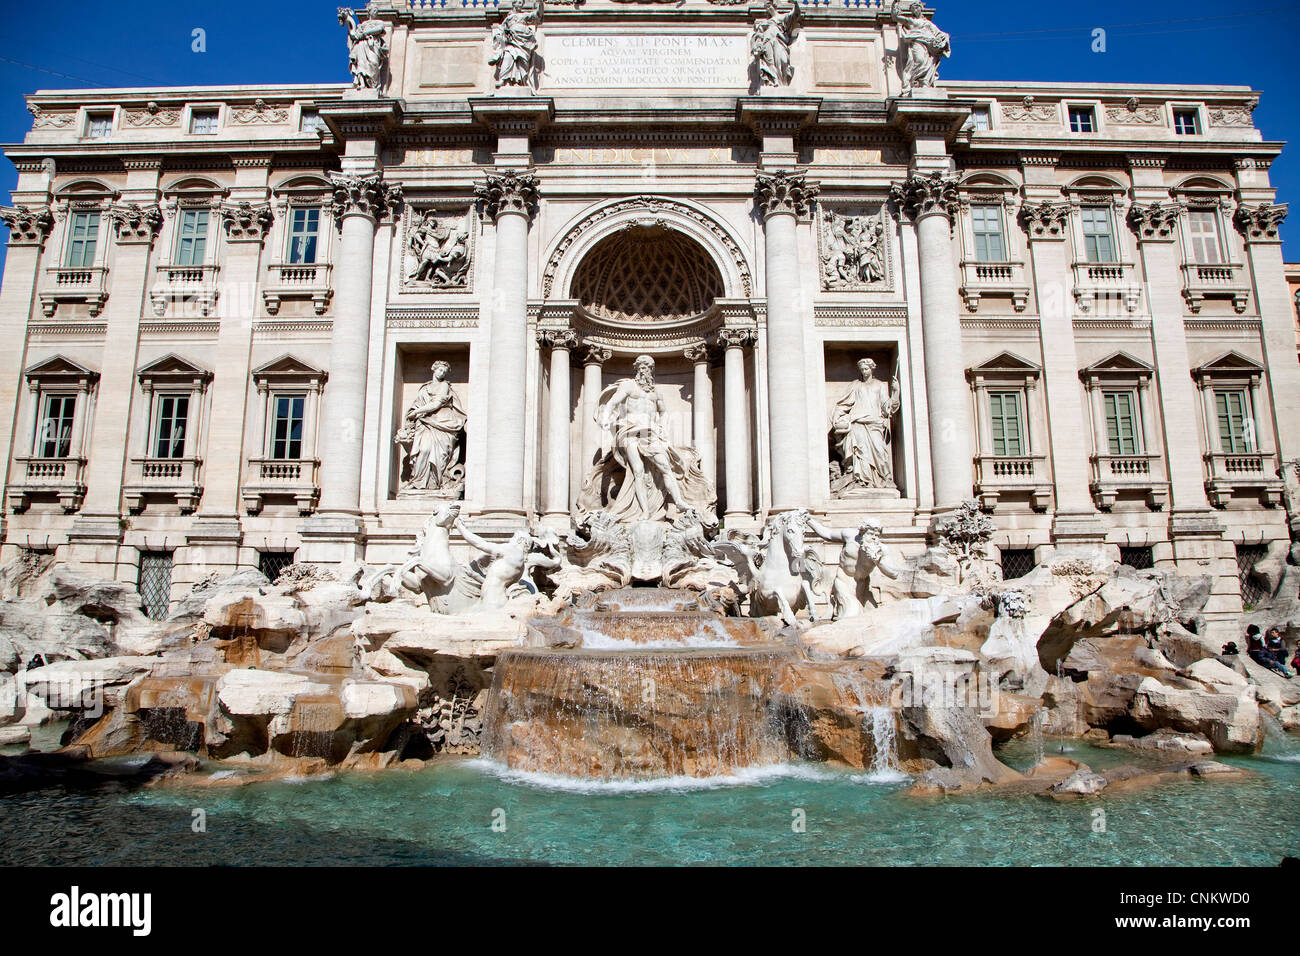 City view of Rome, Italy with old buildings, monuments, art and tourists. Roma, Italia, Europe. Trevi Fountain, Fontana di Trevi Stock Photo